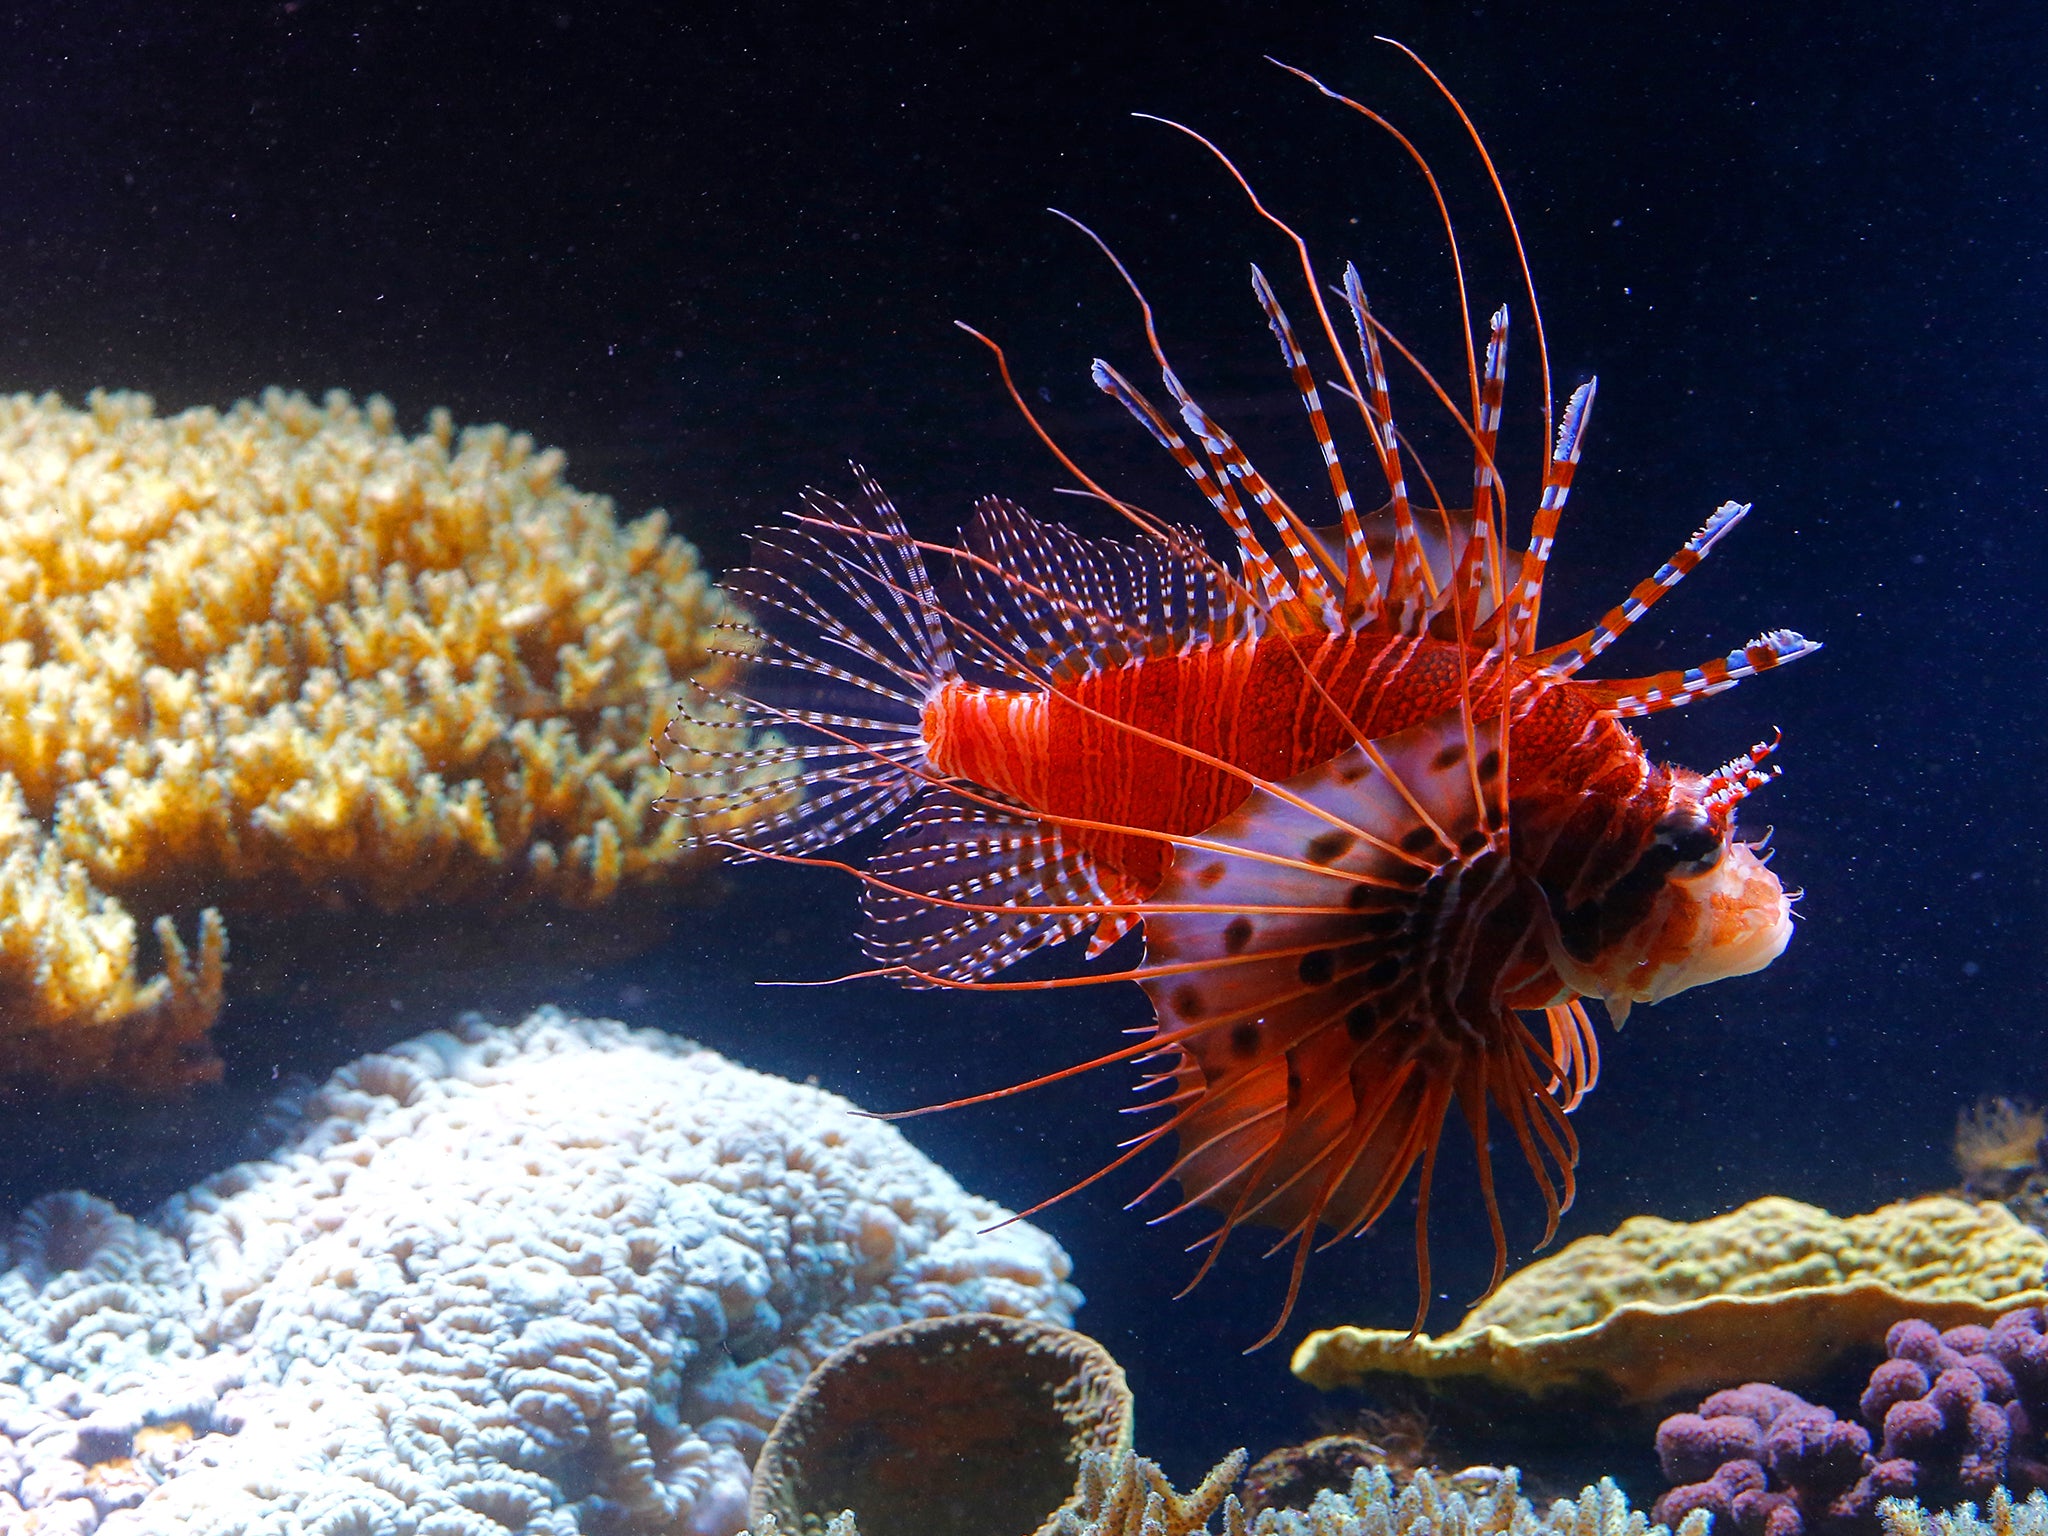 A red lionfish (Pterois volitans) swims in the aquarium of the Schonbrunn zoo